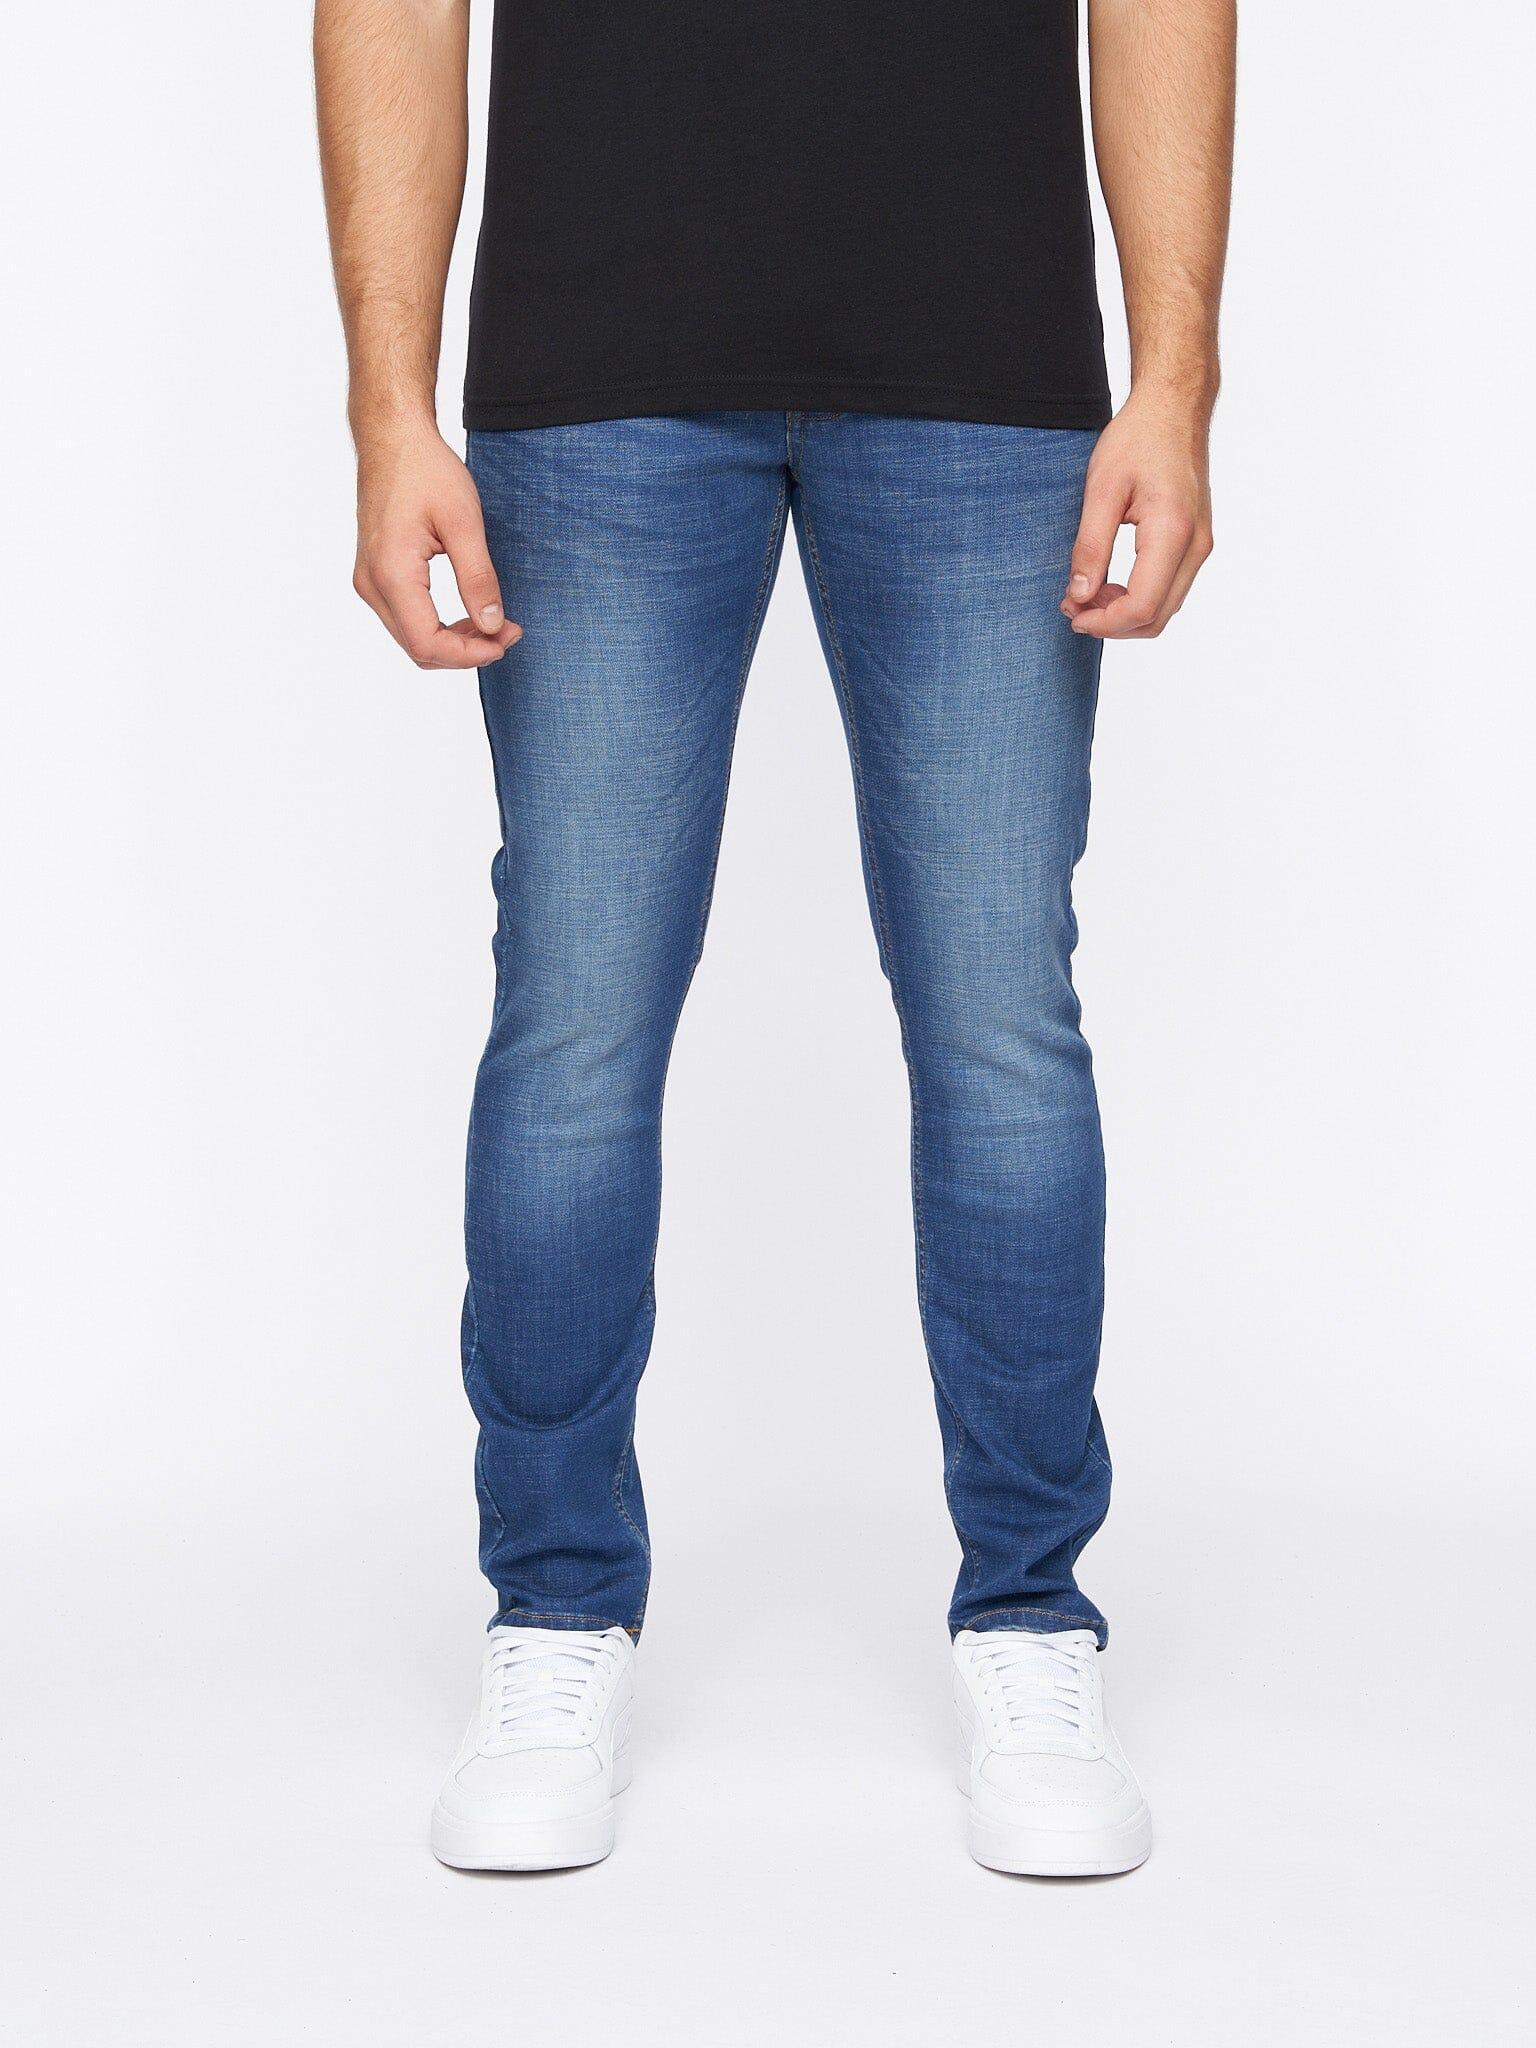 Duck And Cover Doves Jeans Mens (Slim Fit) - BTM-3081